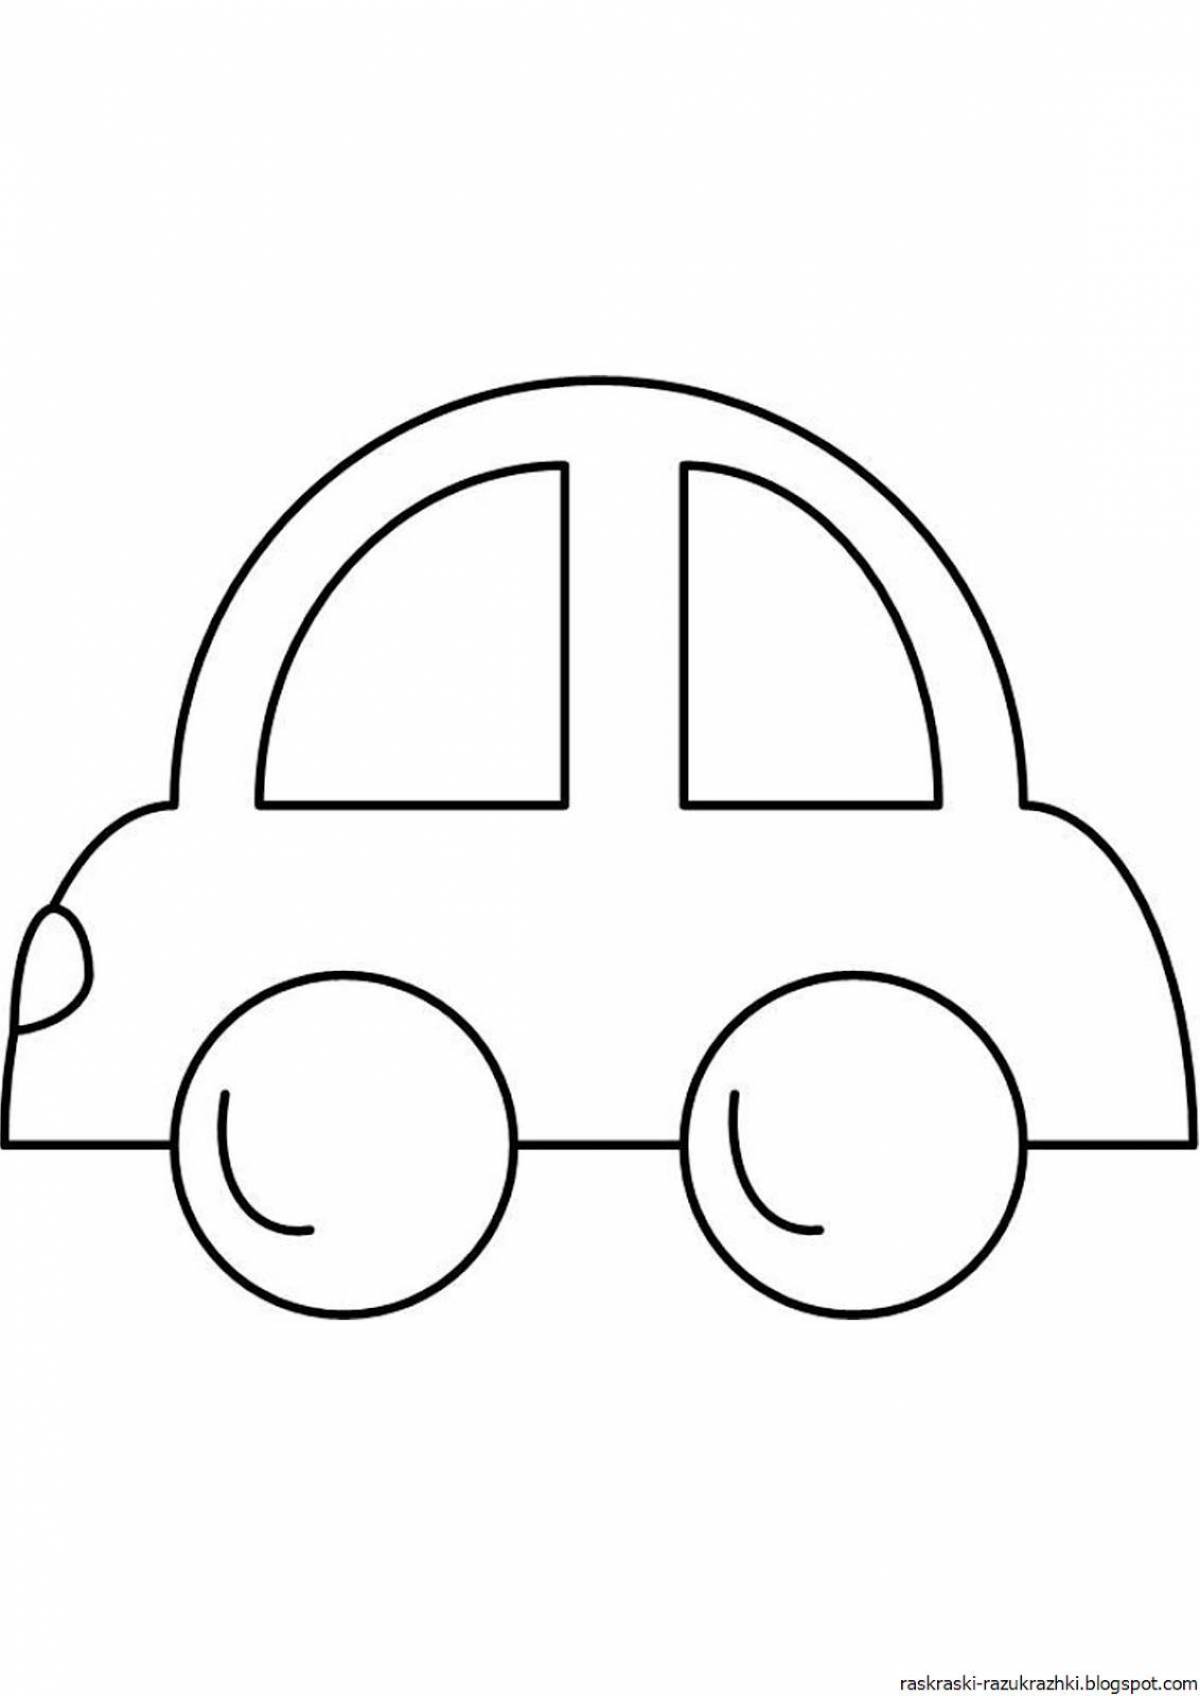 Coloring pages shiny cars for kids 2-3 years old